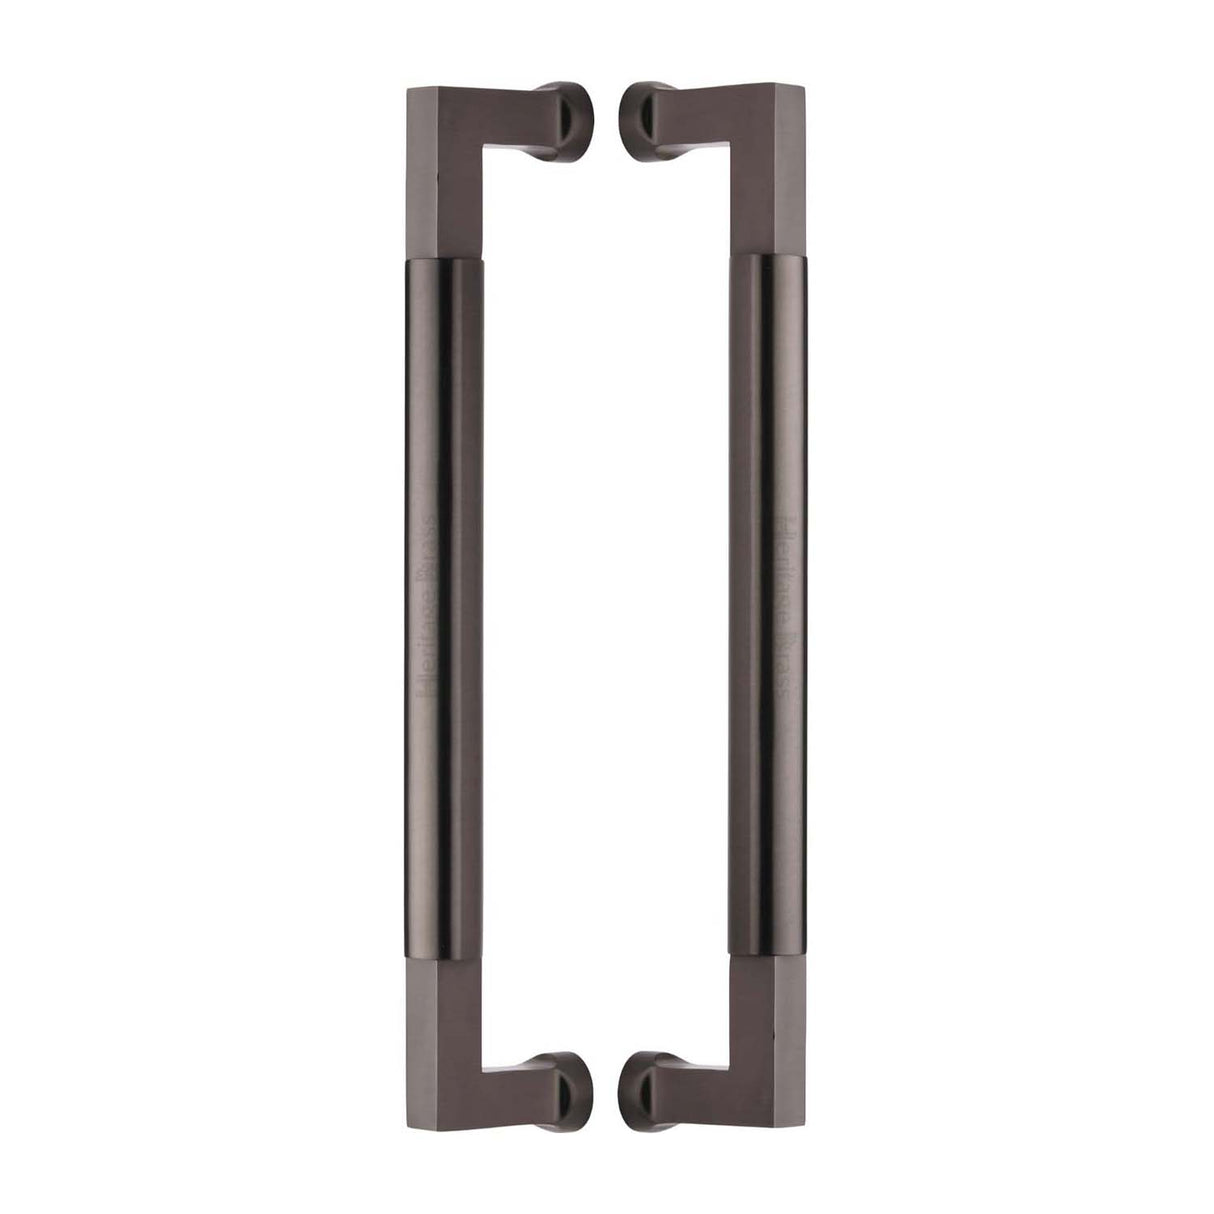 This is an image of a Heritage Brass - Door Pull Handle Bauhaus Design 330mm Matt Bronze Finish, btb1312-330-mb that is available to order from Trade Door Handles in Kendal.